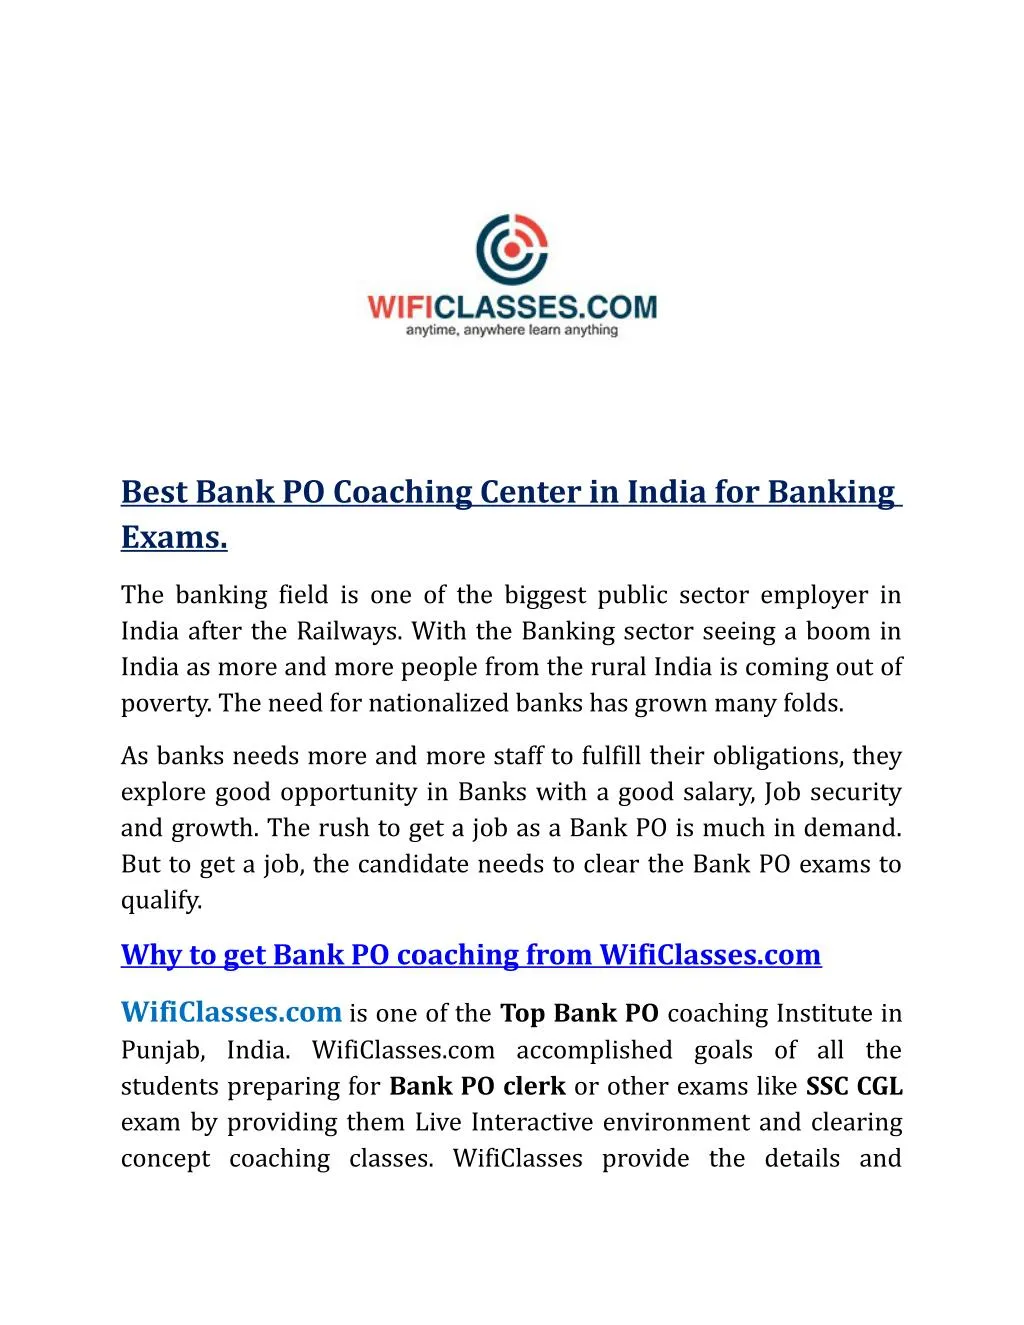 best bank po coaching center in india for banking